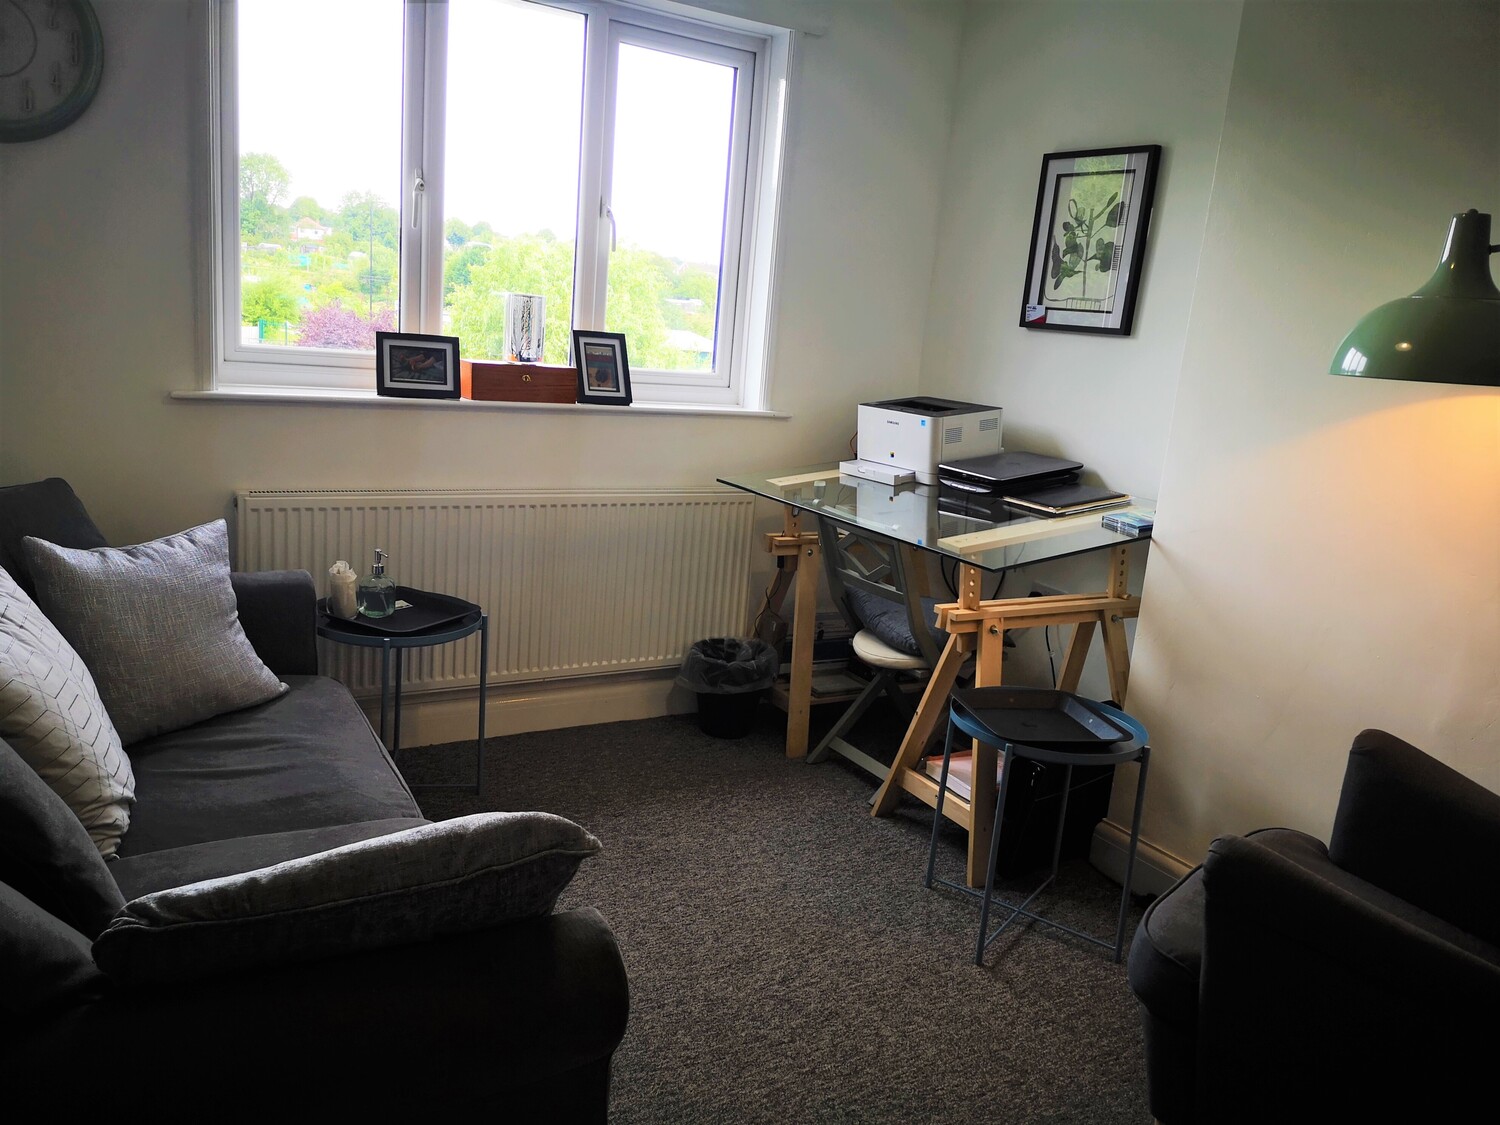 Gallery Photo of The Counselling Room